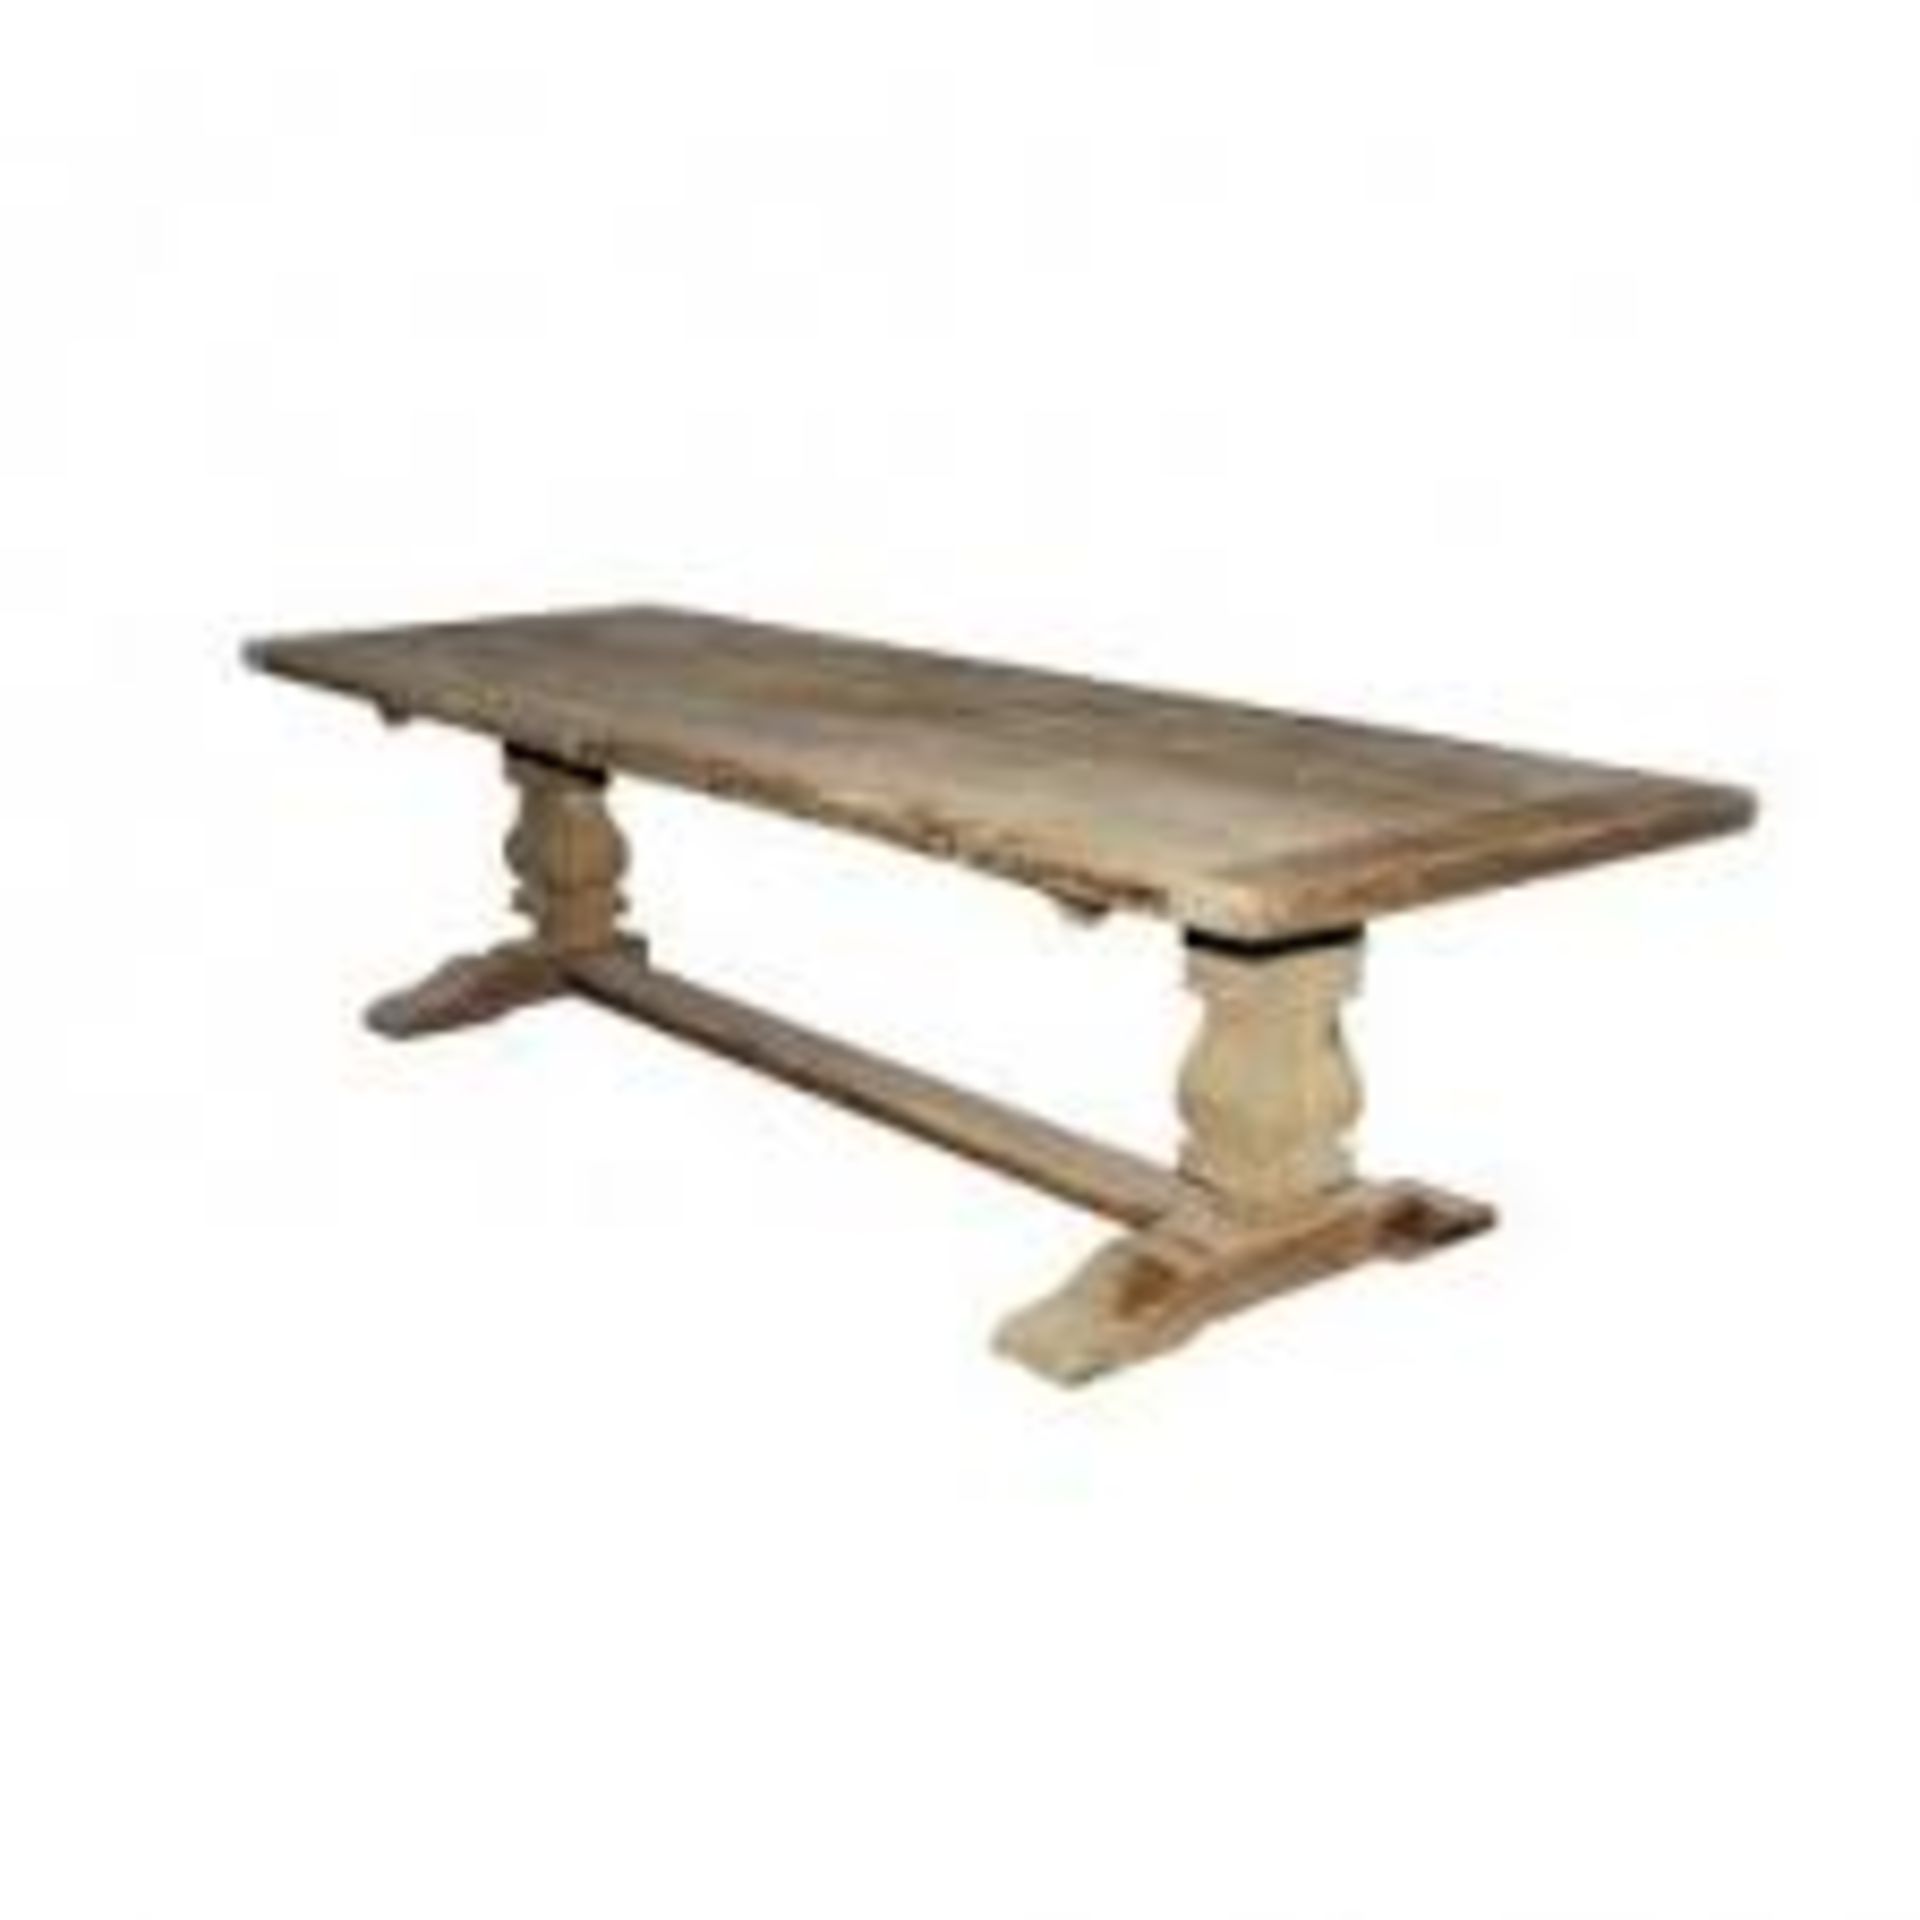 Salvage Pillaster Lamp Table Genuine English Reclaimed Timber 61 5 X 61 5 X 75cm